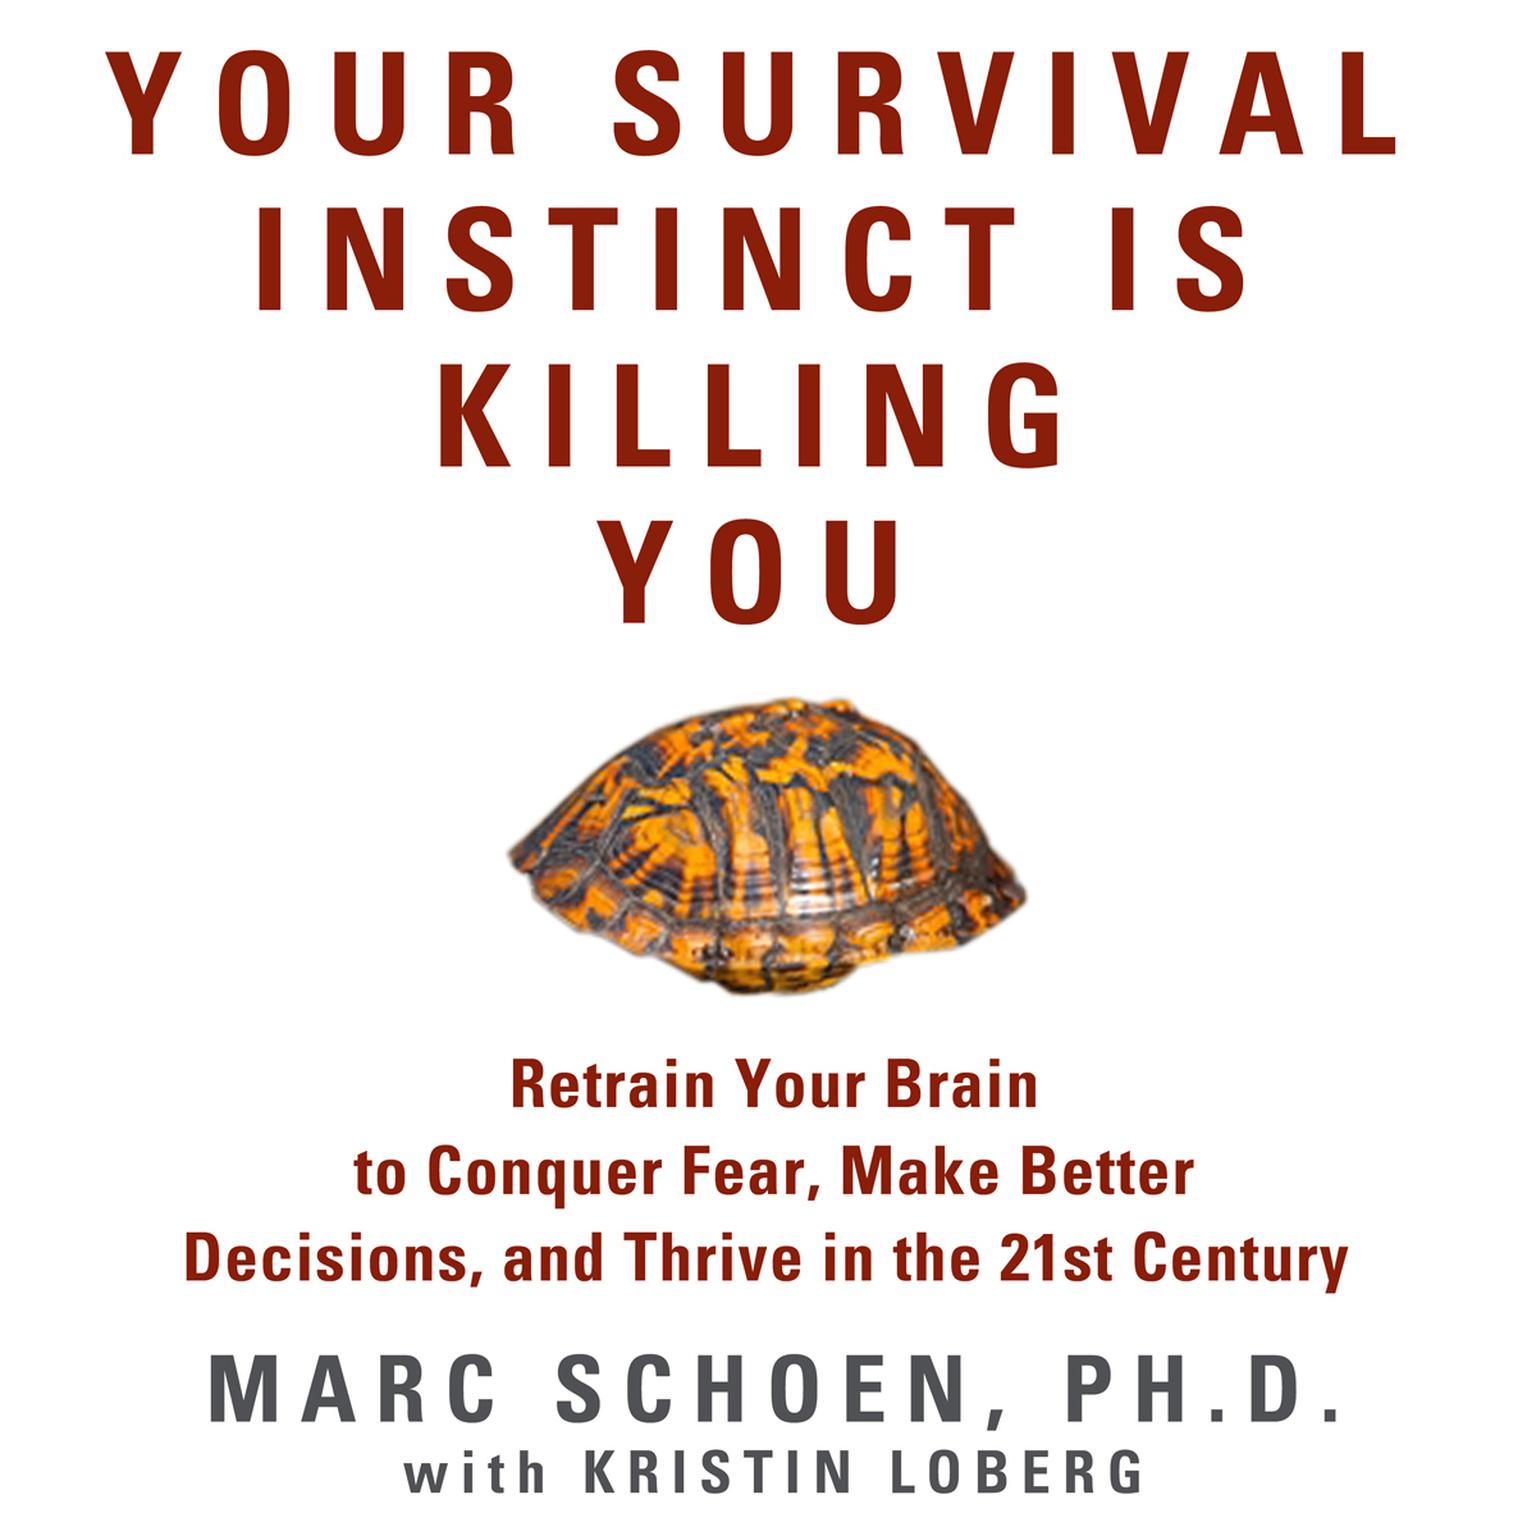 Your Survival Instinct Is Killing You: Retrain Your Brain to Conquer Fear, Make Better Decisions, and Thrive in the 21st Century Audiobook, by Marc Schoen